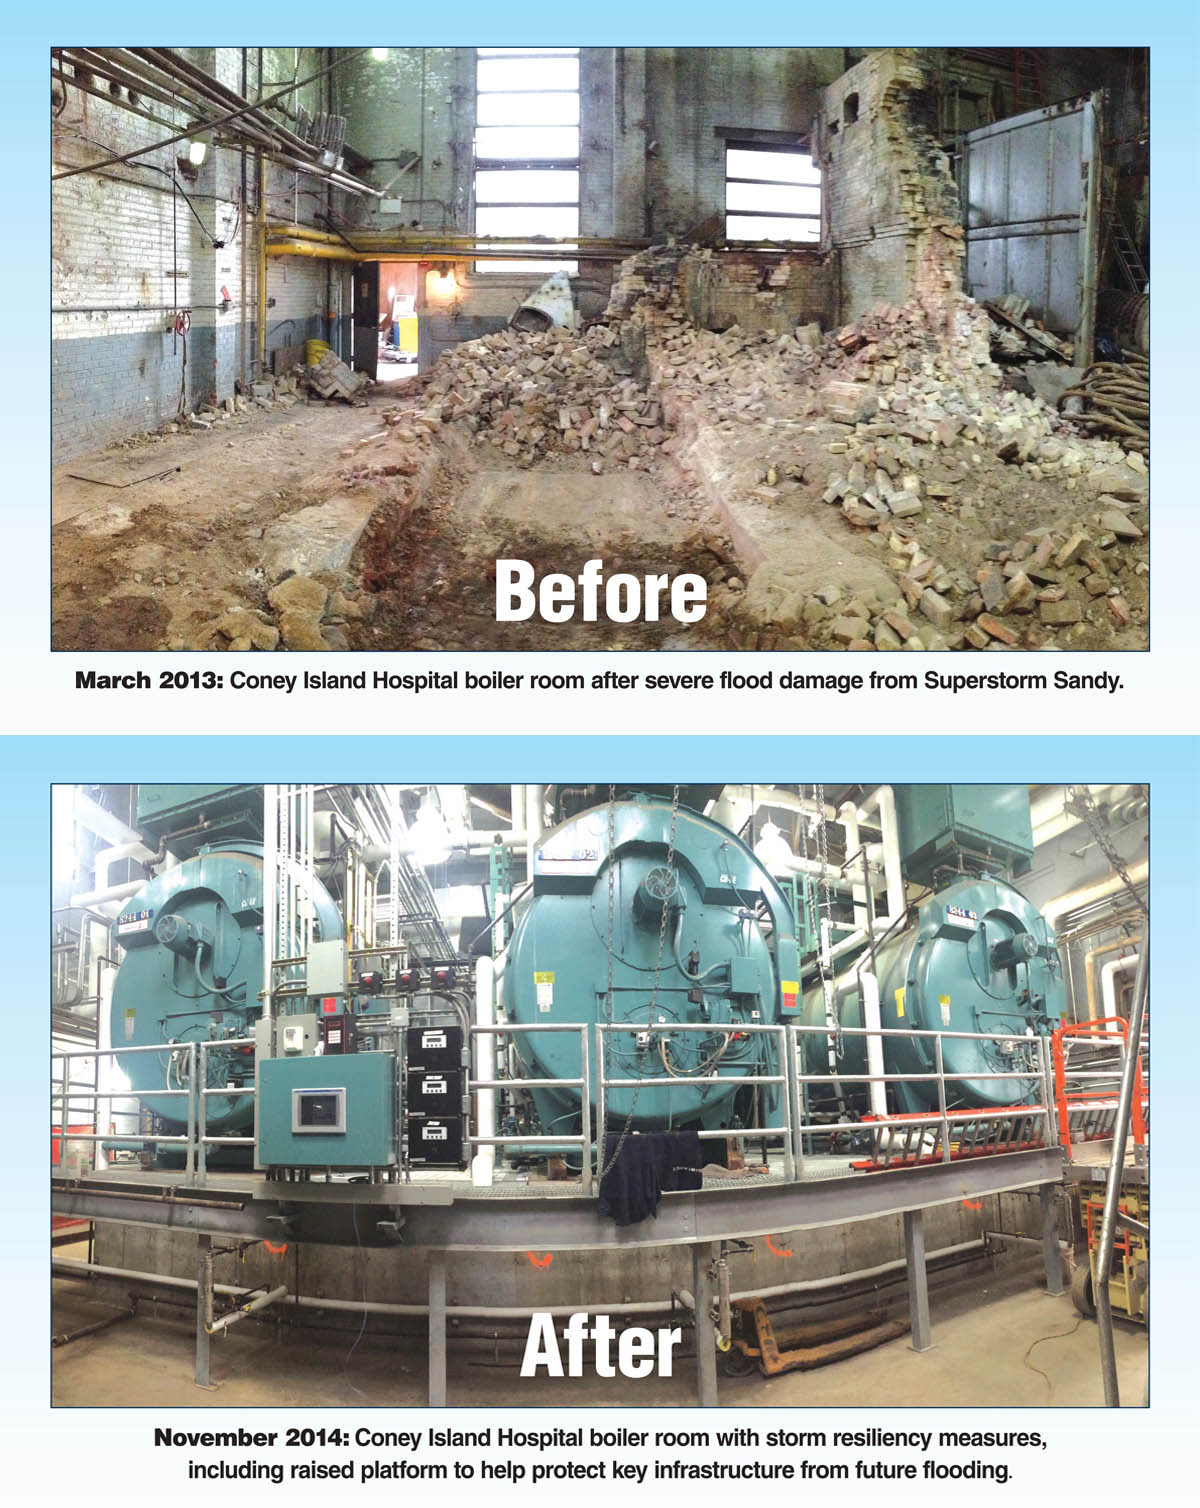 Coney Island boiler room before and after flooding